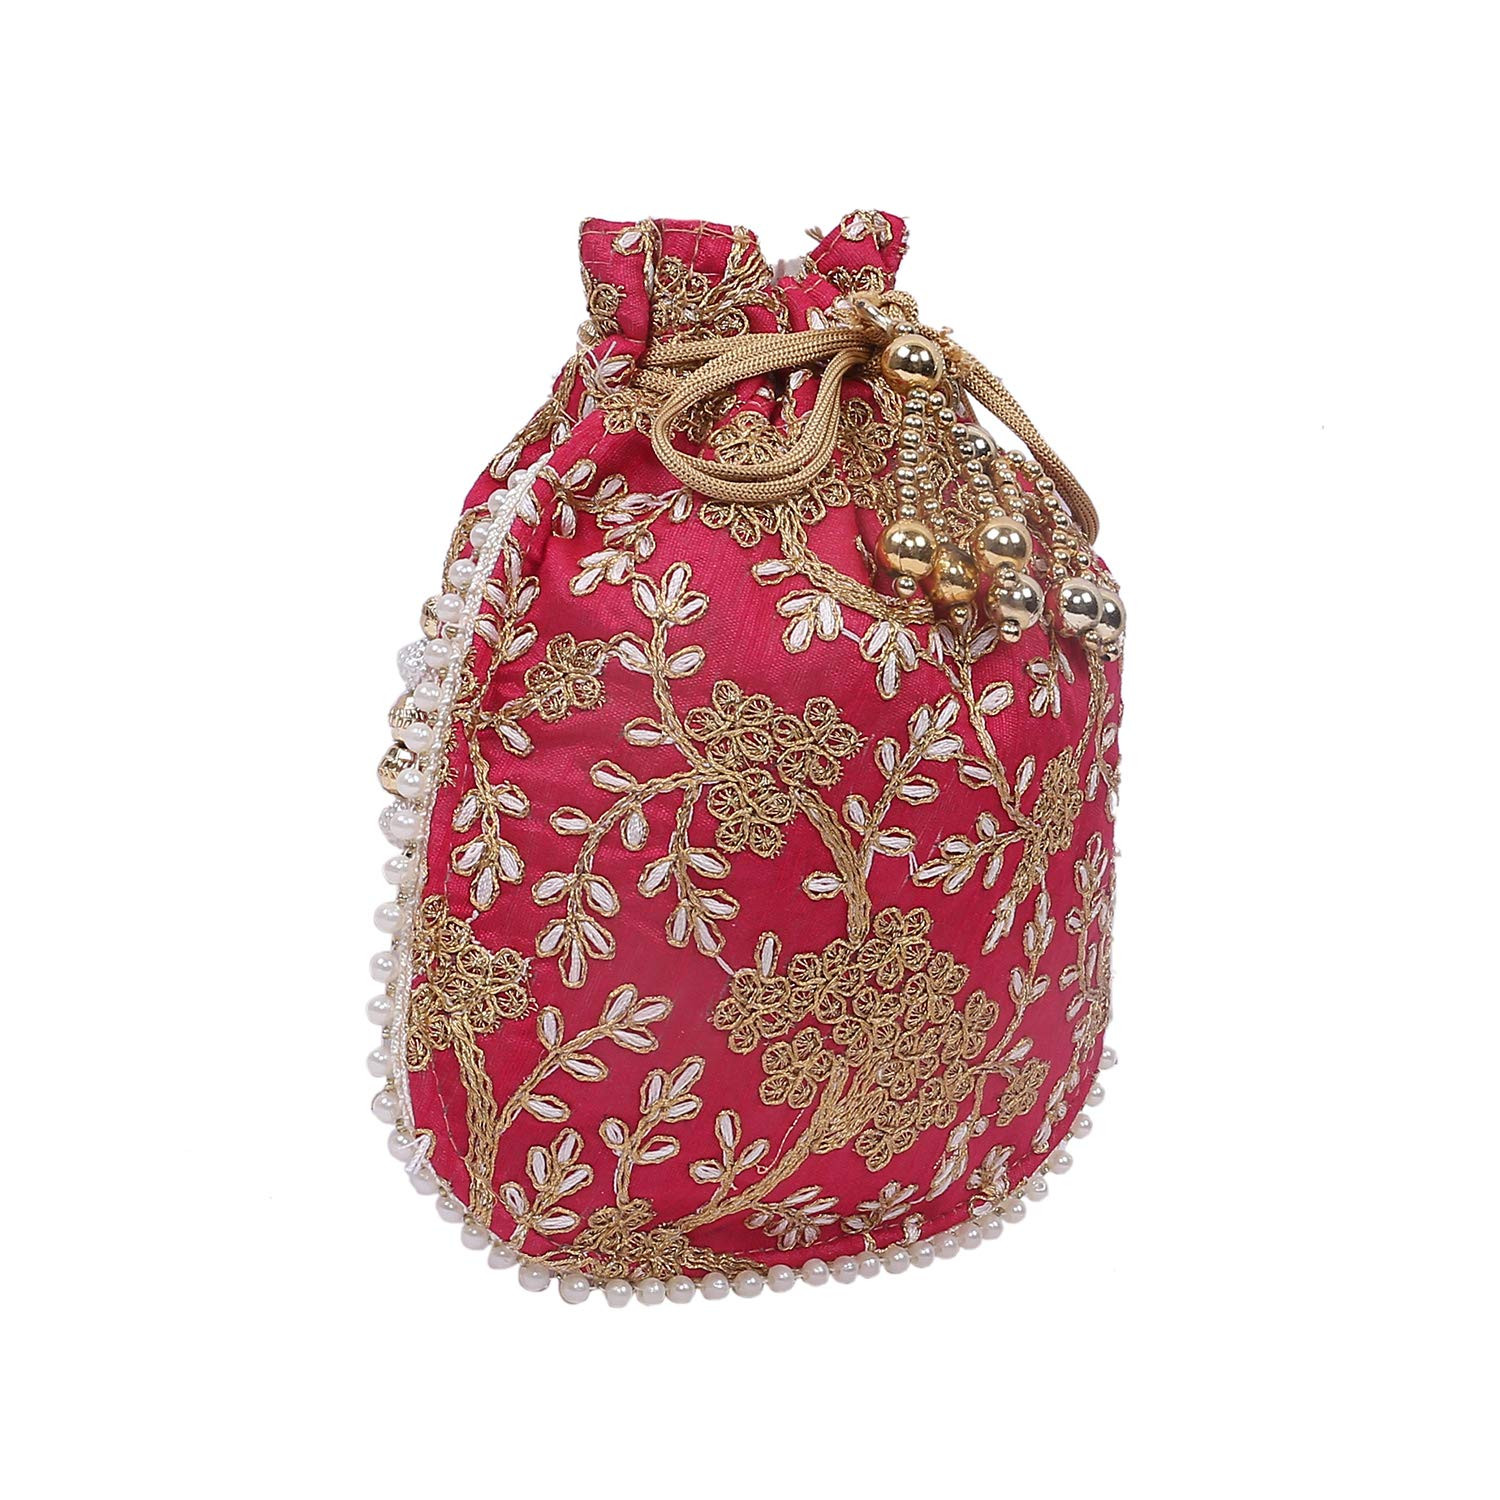 Kuber Industries Embroidery Drawstring Potli|Hand Purse With Gold Pearl Border & Handle For Woman,Girls (Red)